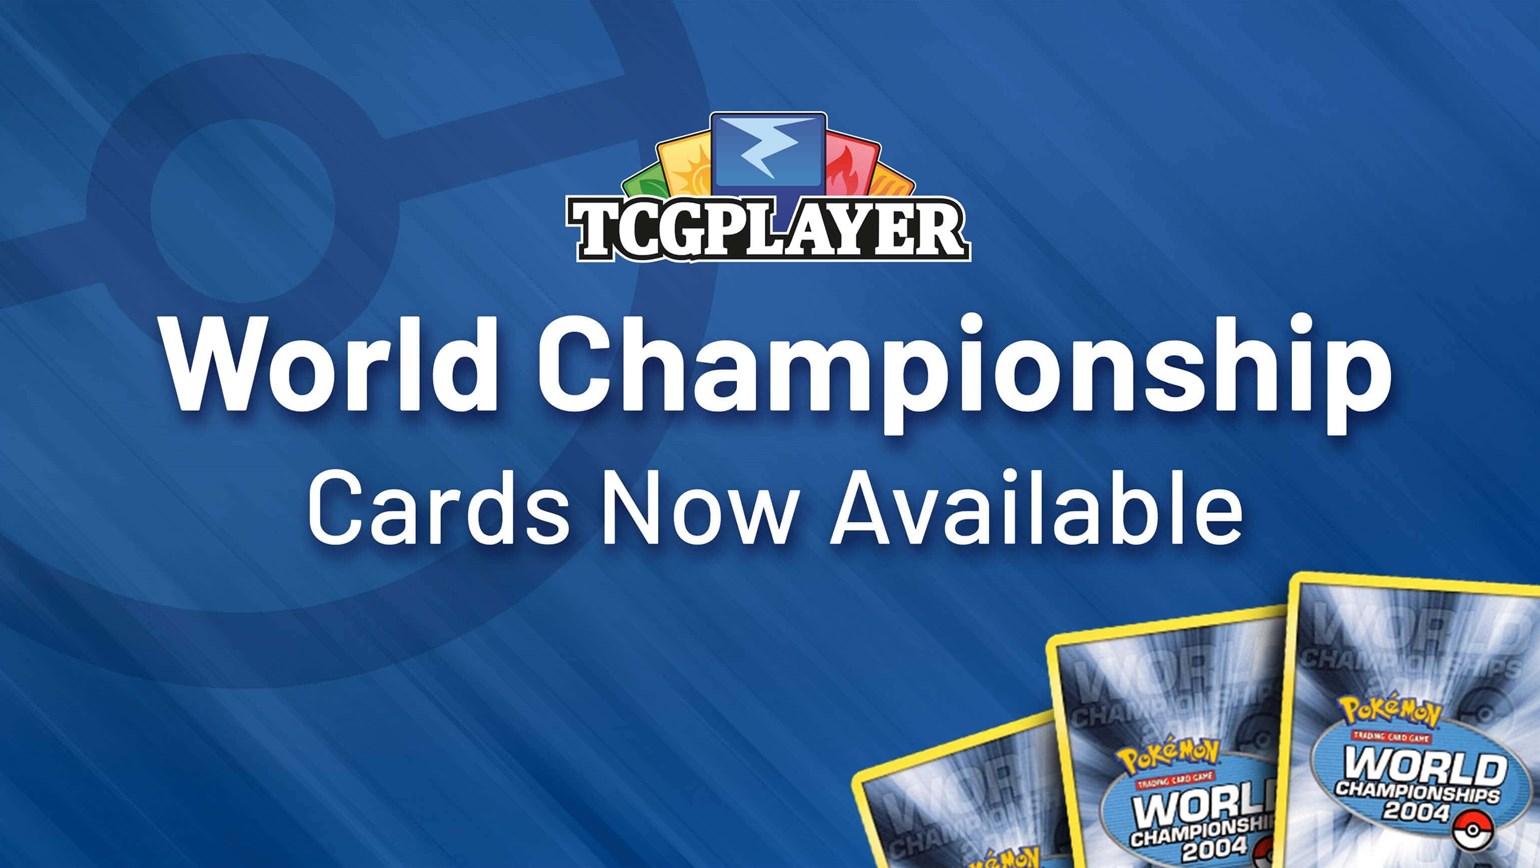 Pokémon Catalog Update: World Championship Cards Now Available